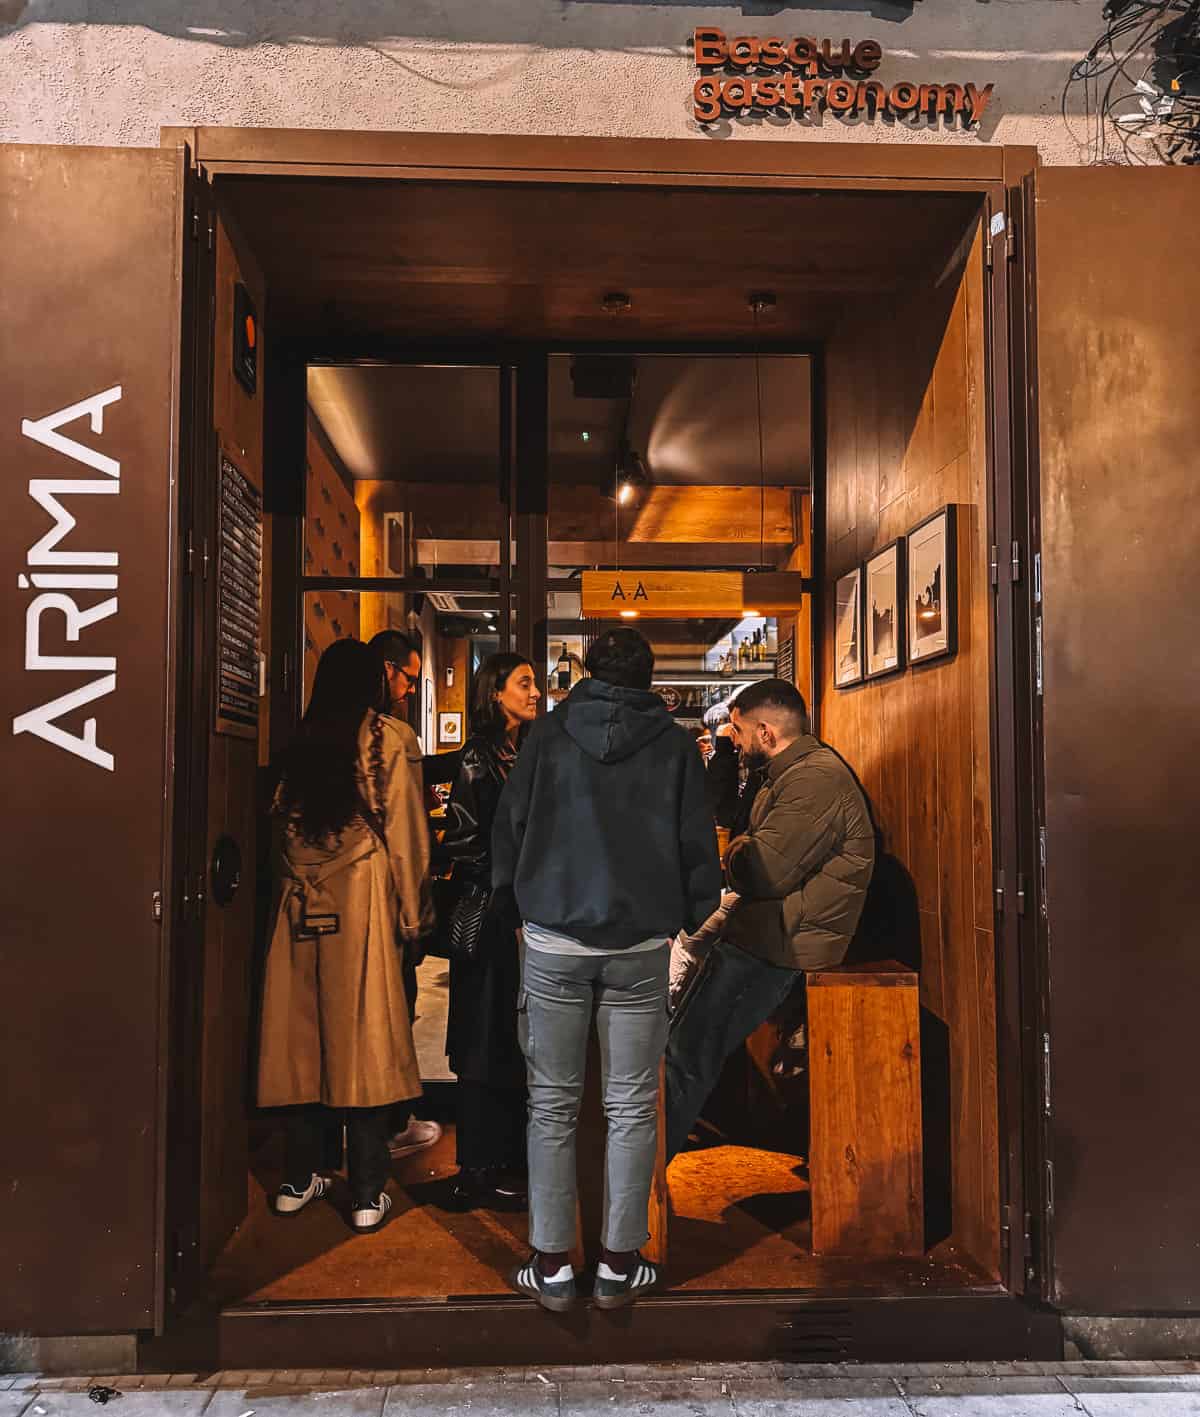 Nighttime scene outside 'ARIMA Basque Gastronomy' restaurant entrance, with people engaging and waiting, emphasizing the lively urban dining experience.